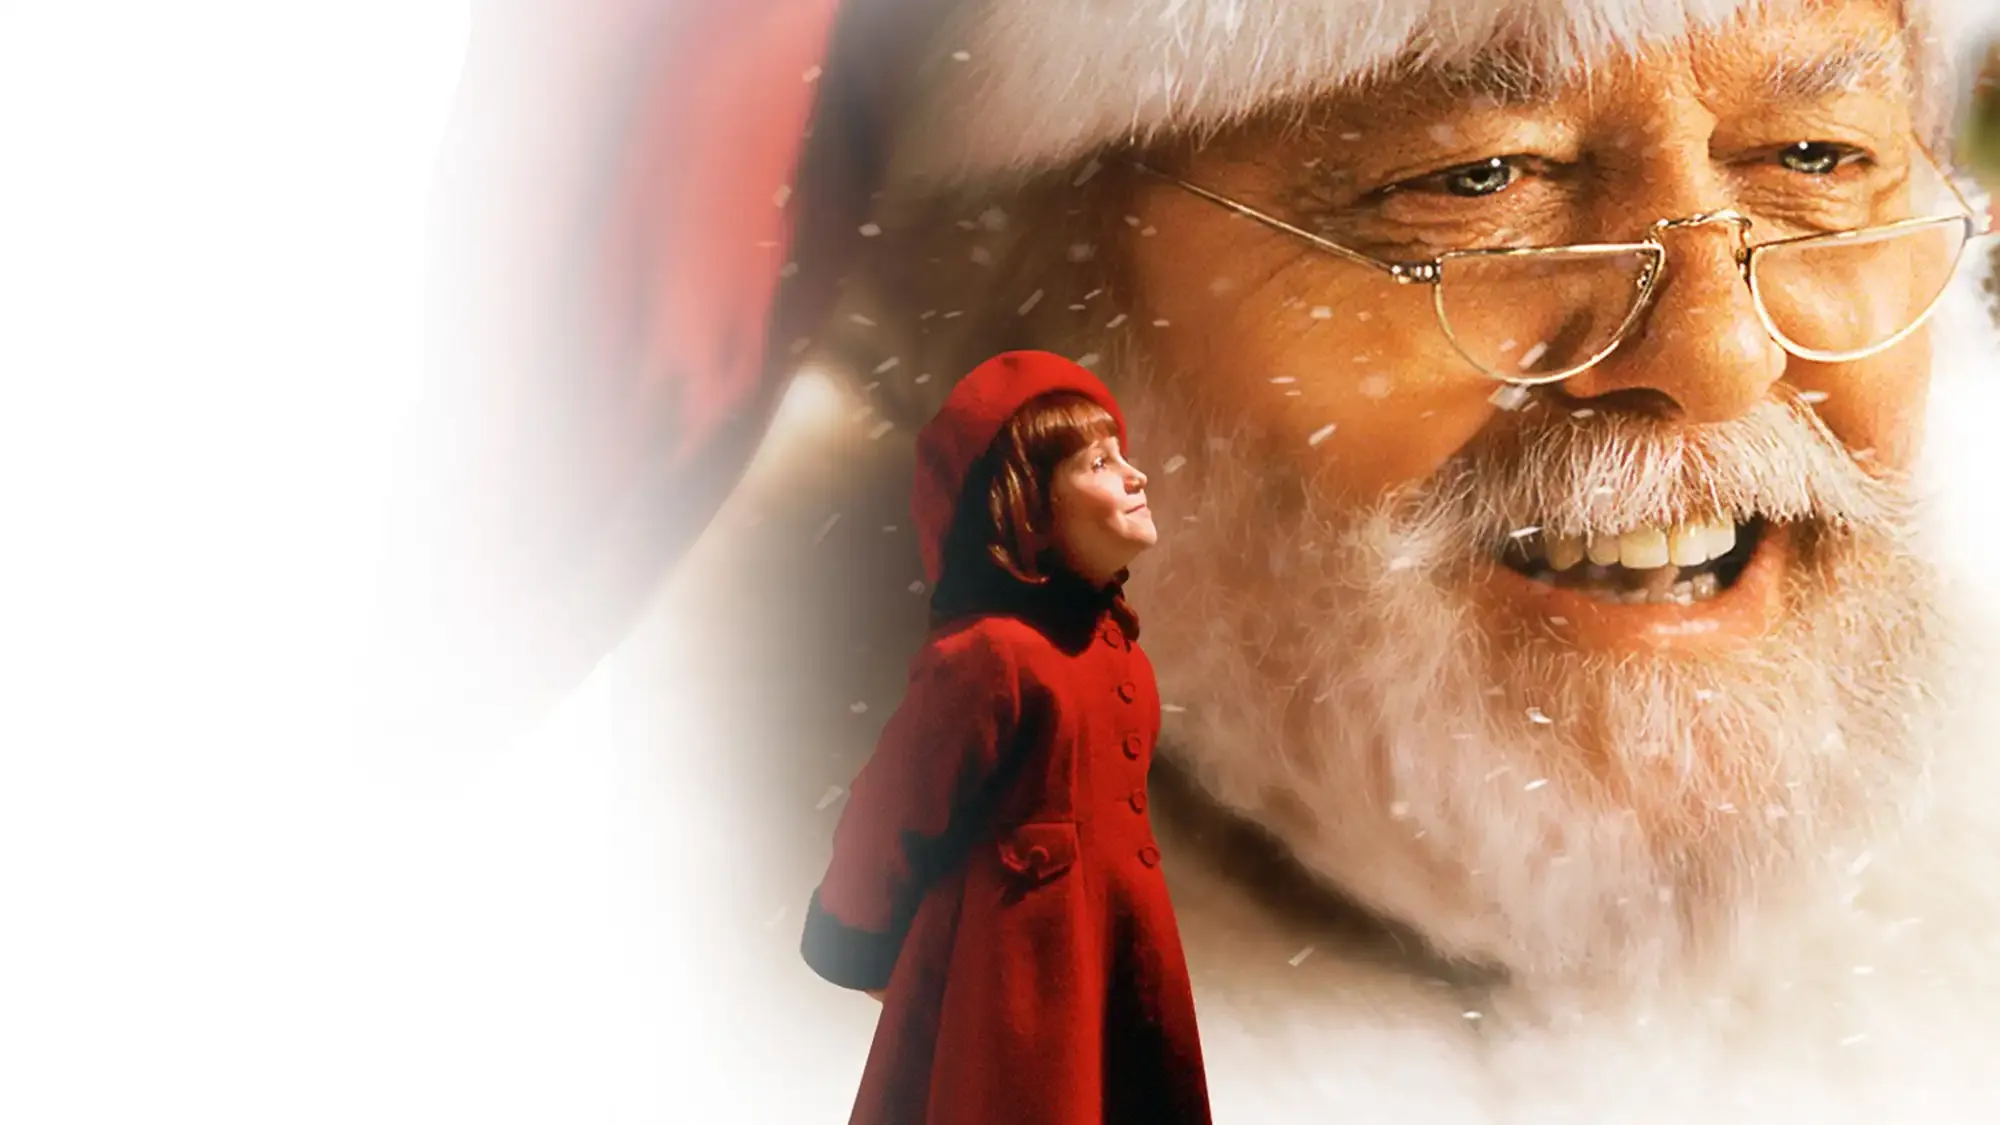 Miracle on 34th Street movie review